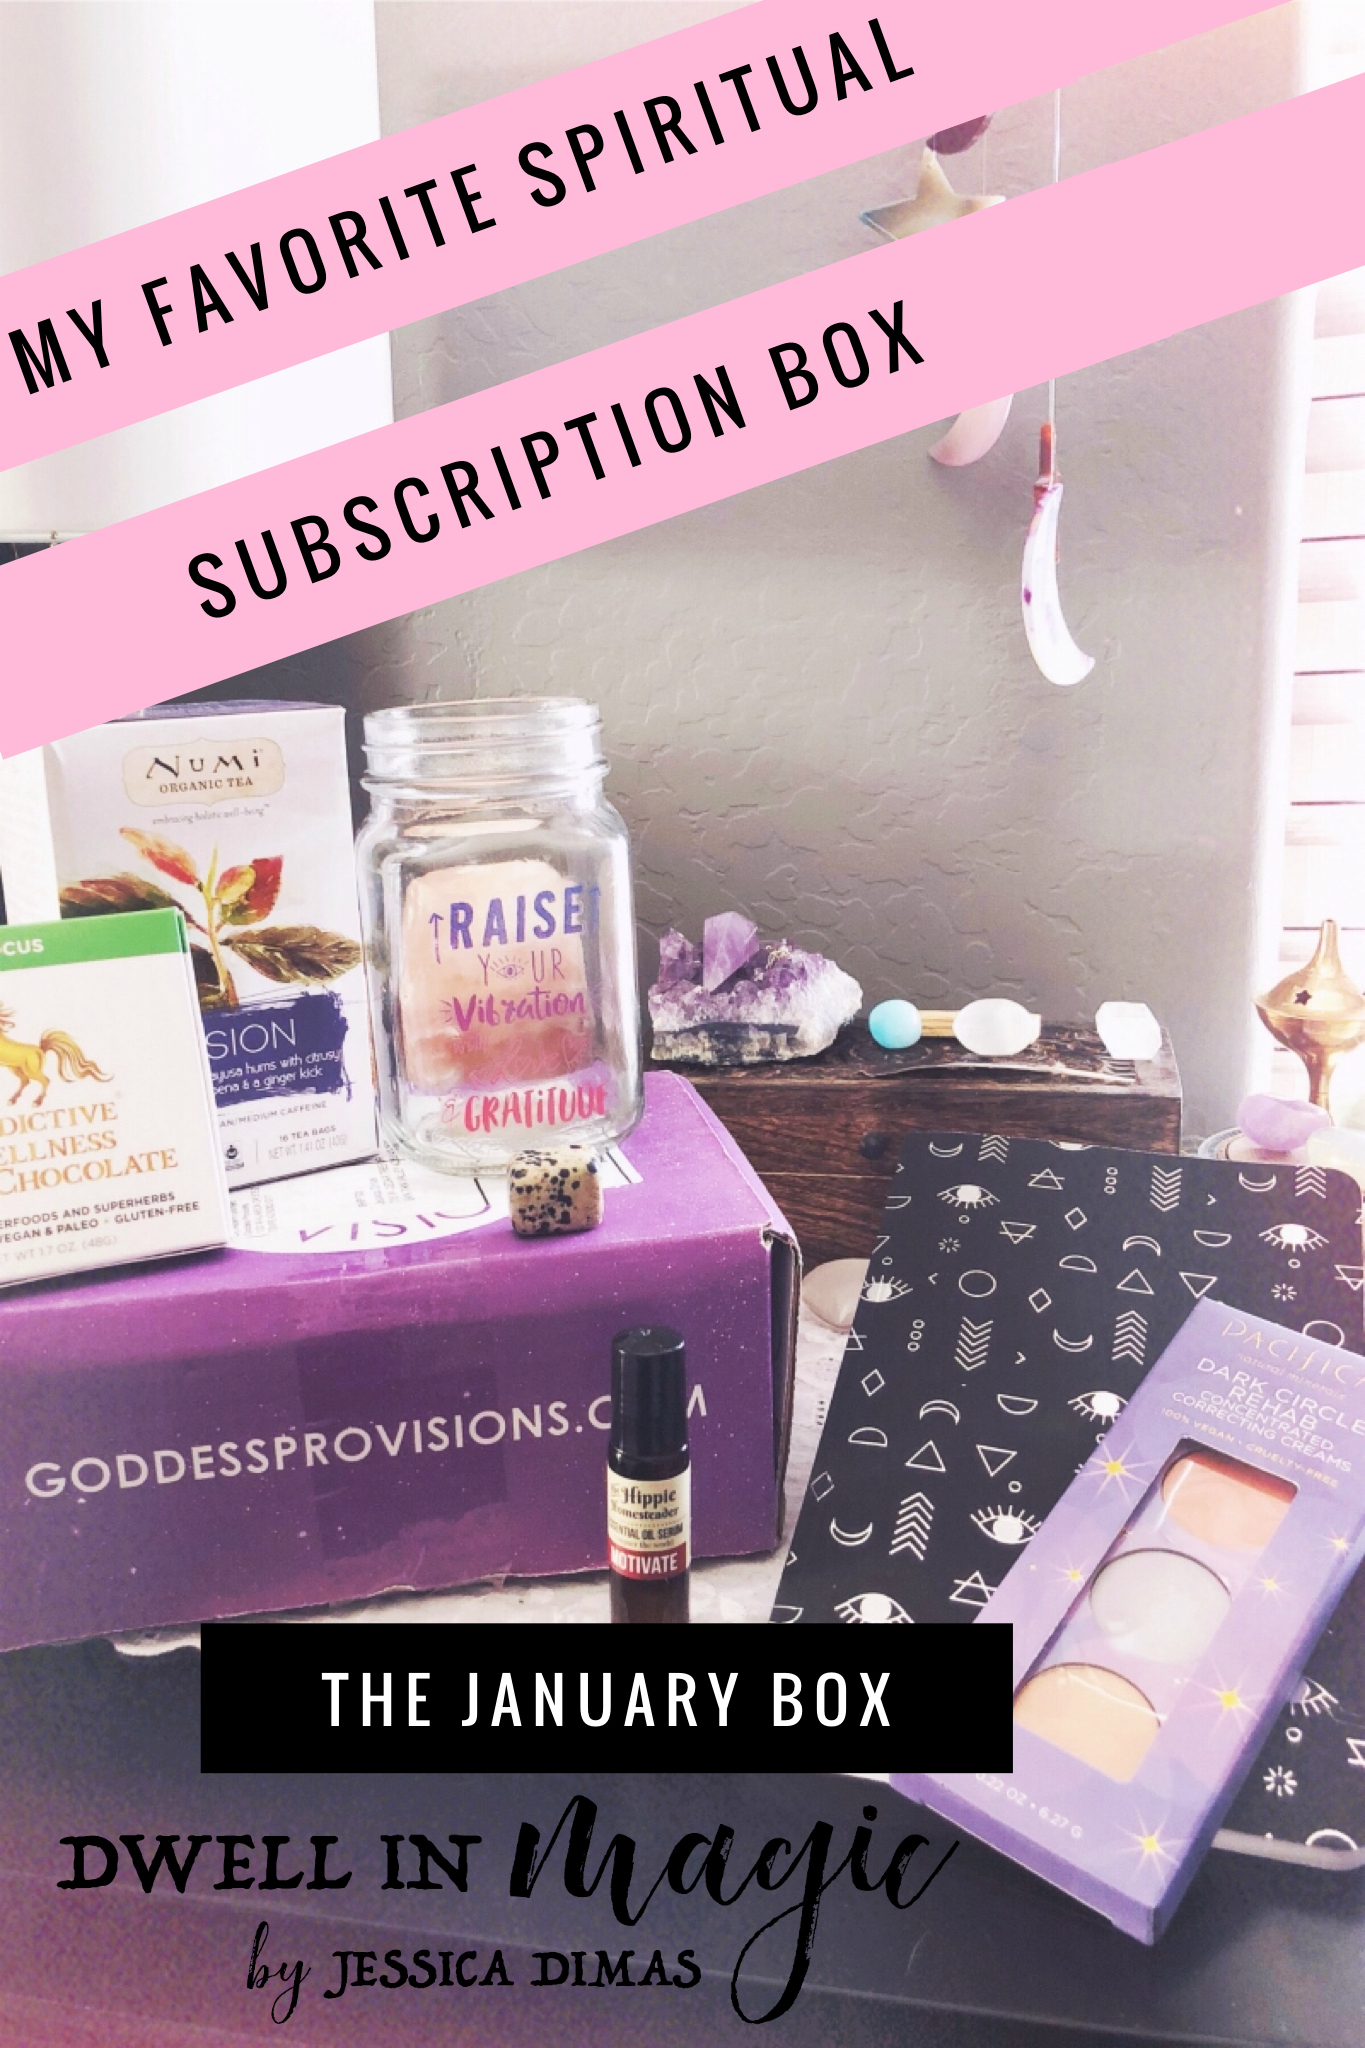 Everything I received and loved in the January 2018 box from Goddess Provisions #subscriptionbox #spiritualsubscriptionbox #witchythings #witchyblog #selfcare #moonmagic #spiritualblog 